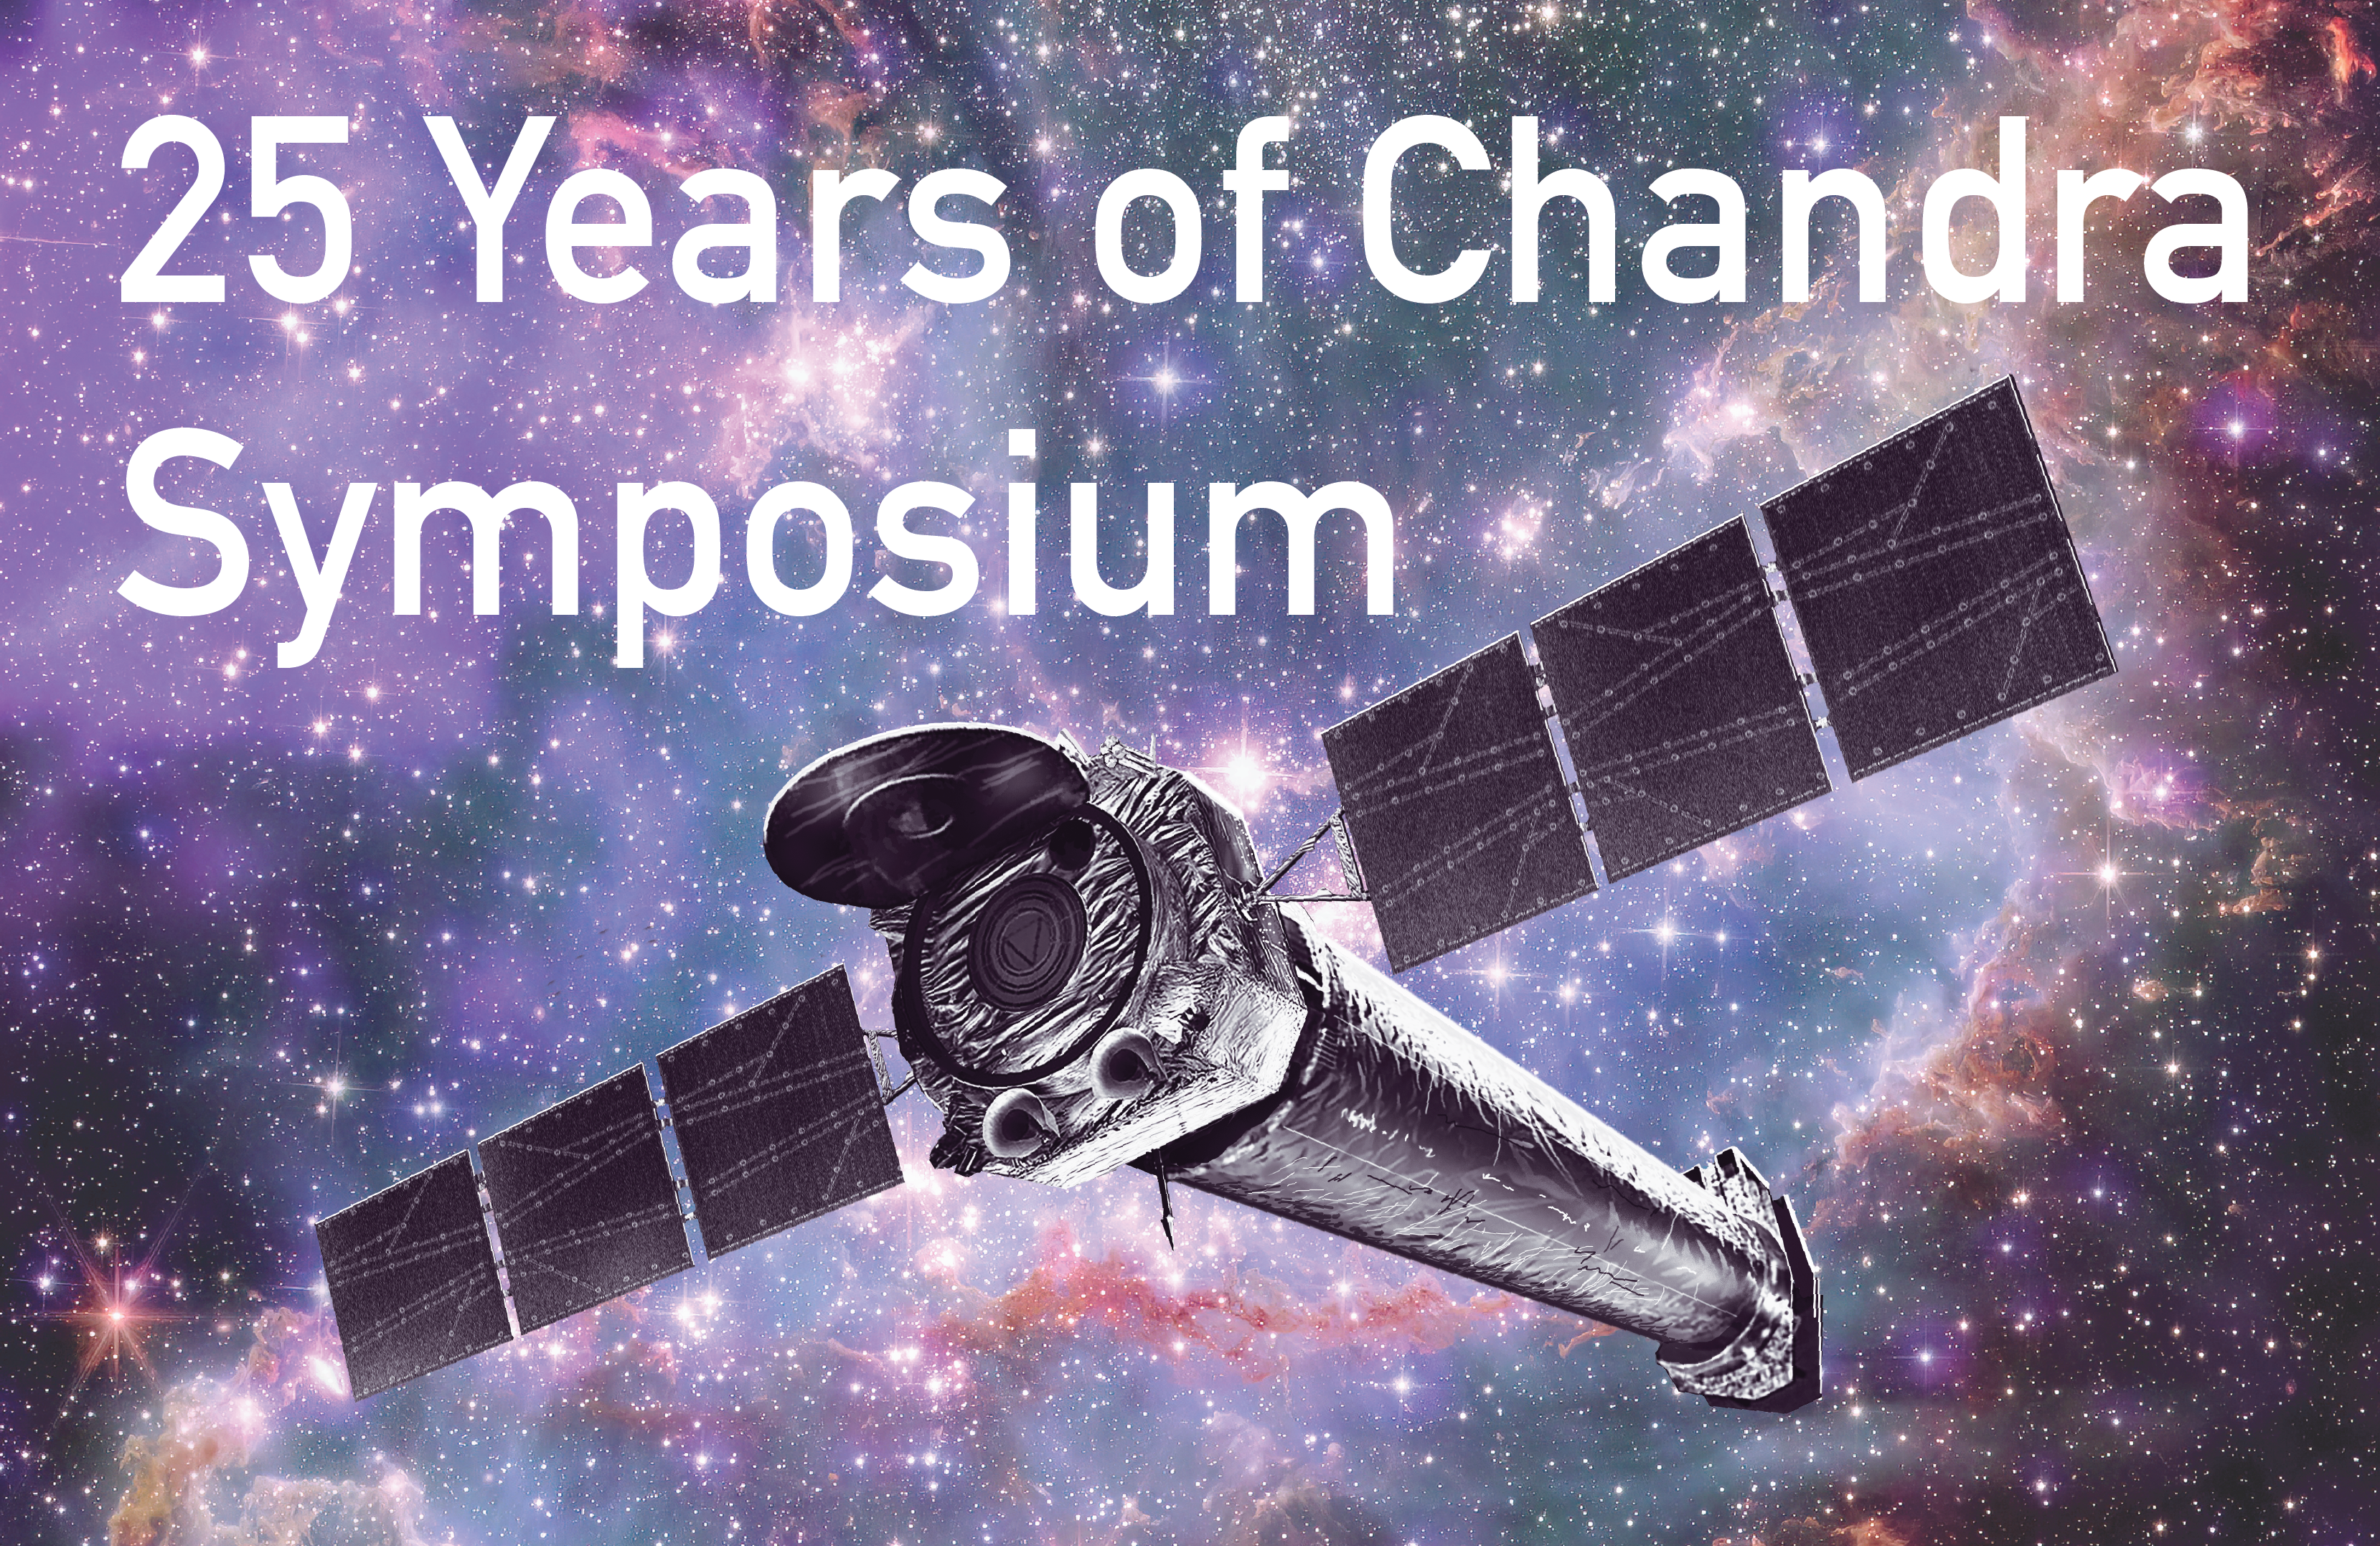 25 Years of Science with Chandra Symposium